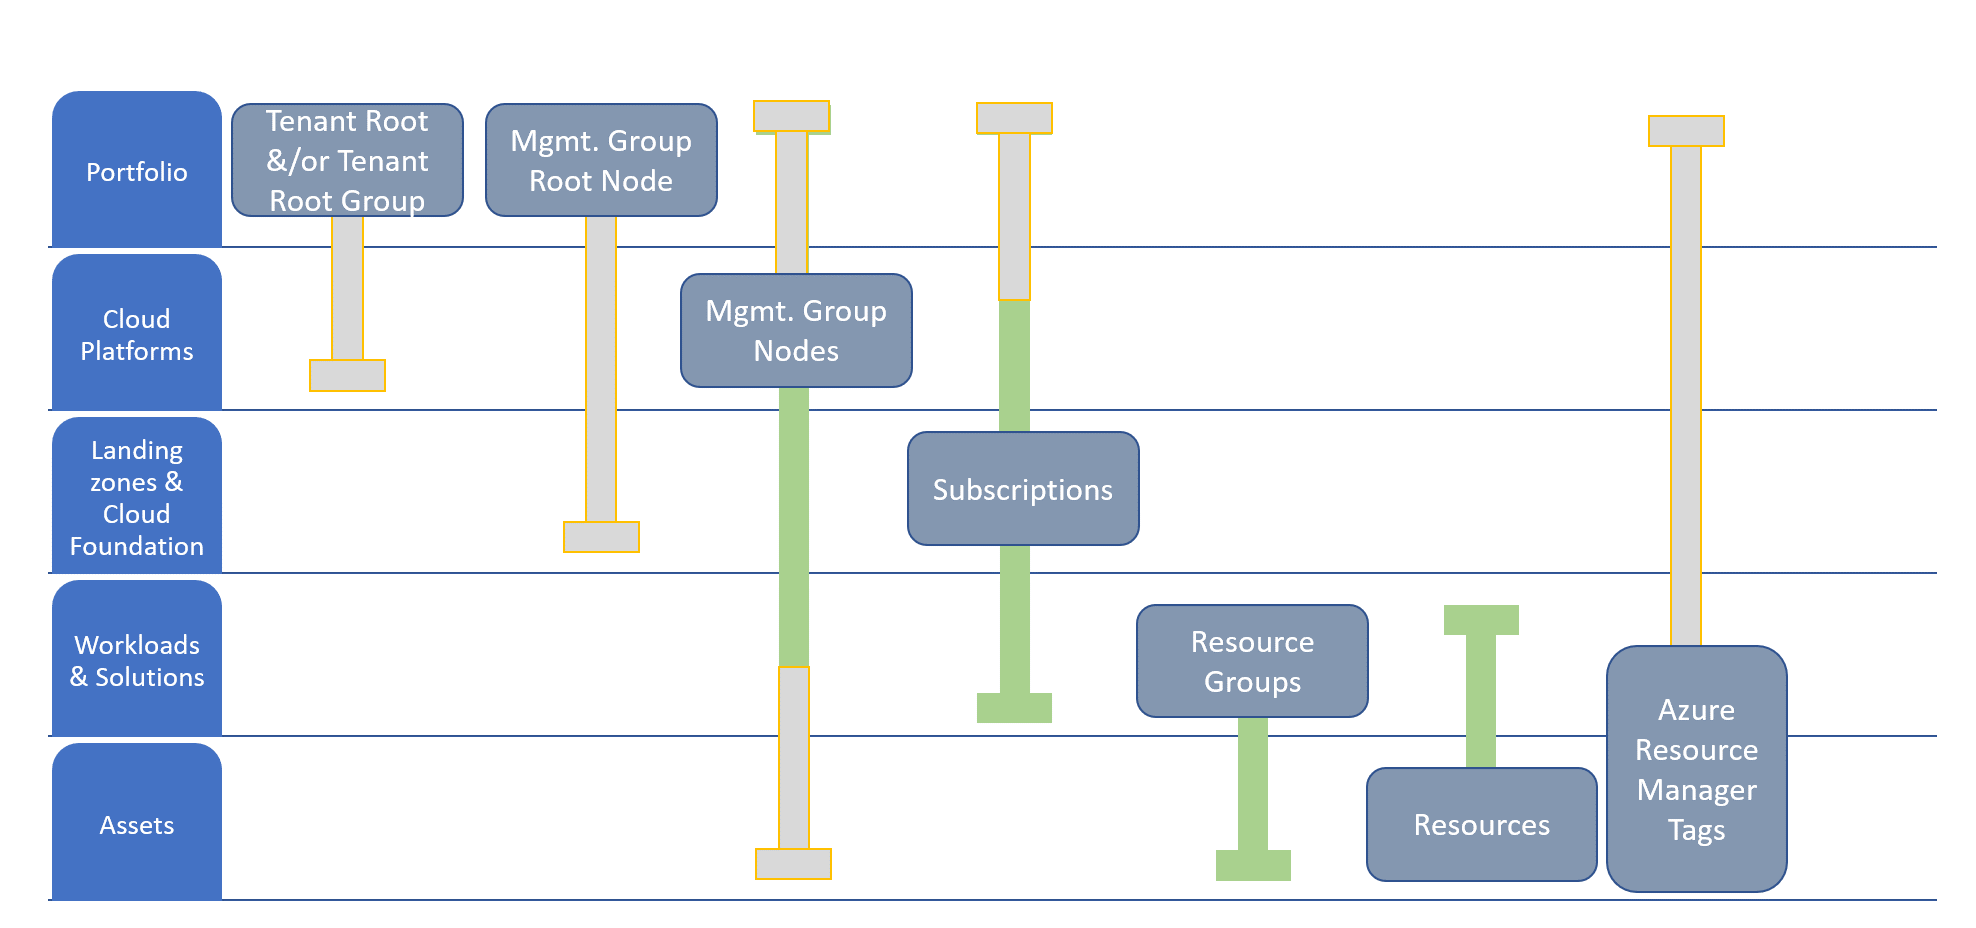 Resource organization aligned to the hierarchy